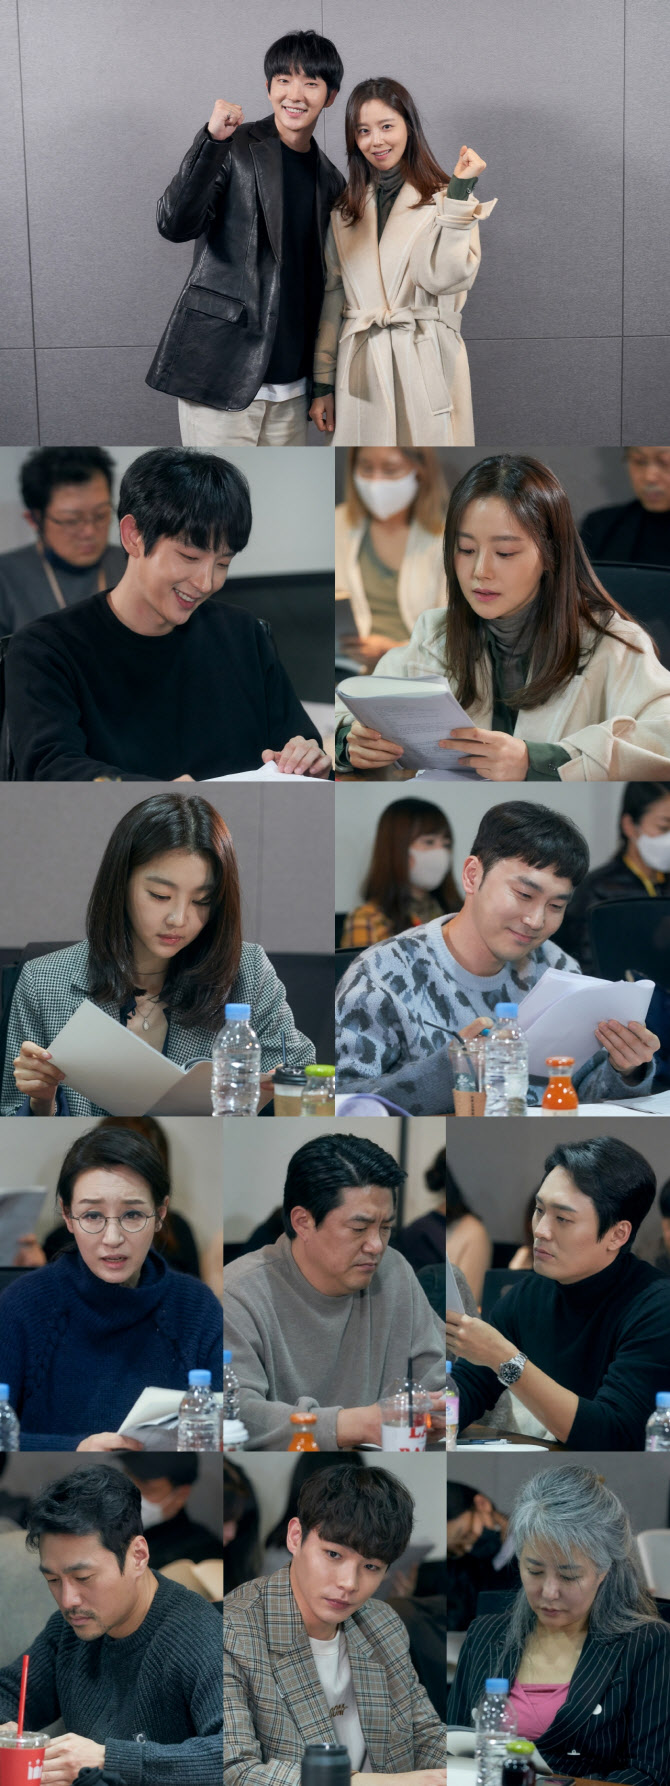 TVNs new tree Drama Flower of Evil unveiled a promising golden lineup with the scene of Transcript Reading, featuring Lee Joon-gi, Moon Chae-won, Jang Hee-jin and Seo Hyeon-woos Hot Summer Days.In the Transcript Reading scene, which announced the start of the full-scale voyage, director Kim Chul-gyu of the luxury director who goes to and from melodrama and thriller, writer Yoo Jung-hee, who is attracting attention with his solid writing power, Lee Joon-gi (played by Baek Hee-sung), Moon Chae-won (played by Cha Ji-won), Jang Hee-jin (played by Dohaesu), and Seo Hy Actors, who believed in the Eon-woo (played by Kim Moo-jin), were all in the spotlight.Lee Joon-gi said, I want to leave it as a work that will be remembered for a long time for viewers. Moon Chae-won also expressed his enthusiasm that he would do his best to show good acting as he met good works.Actors, who exchanged greetings in a cheerful atmosphere, began to bloom properly with Hot Summer Days, which immersed themselves in the roles and filled with the dialogue and emotions that they exchanged like Ping Pong.Lee Joon-gi, who was divided into Baek Hee-sung, a man who hid the past like a time bomb in the play, and even loved it, completed the breathtaking tightrope of the extreme, and Moon Chae-won showed a different act of acting with the double charm of his loving wife and charismatic powerful Detective.Above all, if the two melodramatic couple Chemie made the scene hot, the delicate Acting, which is suspicious of each other, filled the scene with breathtaking tension.In this way, Actors, who are not too much of a luxury actor, such as Kim Ji-hoon, Choi Byung-mo, Son Jong-hak, Nam Ki-ae and Yoon Byung-hee, who have a changing spectrum of Acting, will join together to increase their immersion.It is said that the production teams ambitious aspiration to make it impossible to let go of the tension as the additional impact figures continue to appear until the middle and late.In addition, the four-color, four-color, four-color, three-color, four-color, three-color, three-color, three-color, three-color, three-color, three-color, three-color, three-color, three-color, three-color, three-color, three-color, three-color, three-color, three-color, three-color, three-color, three-color, three-color, three-color, three-color, three-color, three-color, three-color, three-color, four-color, four-color, four-color, four-color, three-color, three-color,As such, TVNs new tree Drama The Flower of Evil, which predicts the perfect synergies of Jang Gambae (writer + director + actor) including Lee Joon-gi, Moon Chae-won, Jang Hee-jin, and Seo Hyeon-woo, as well as directing and scripting, will be broadcast for the first time in July.kim ga-young